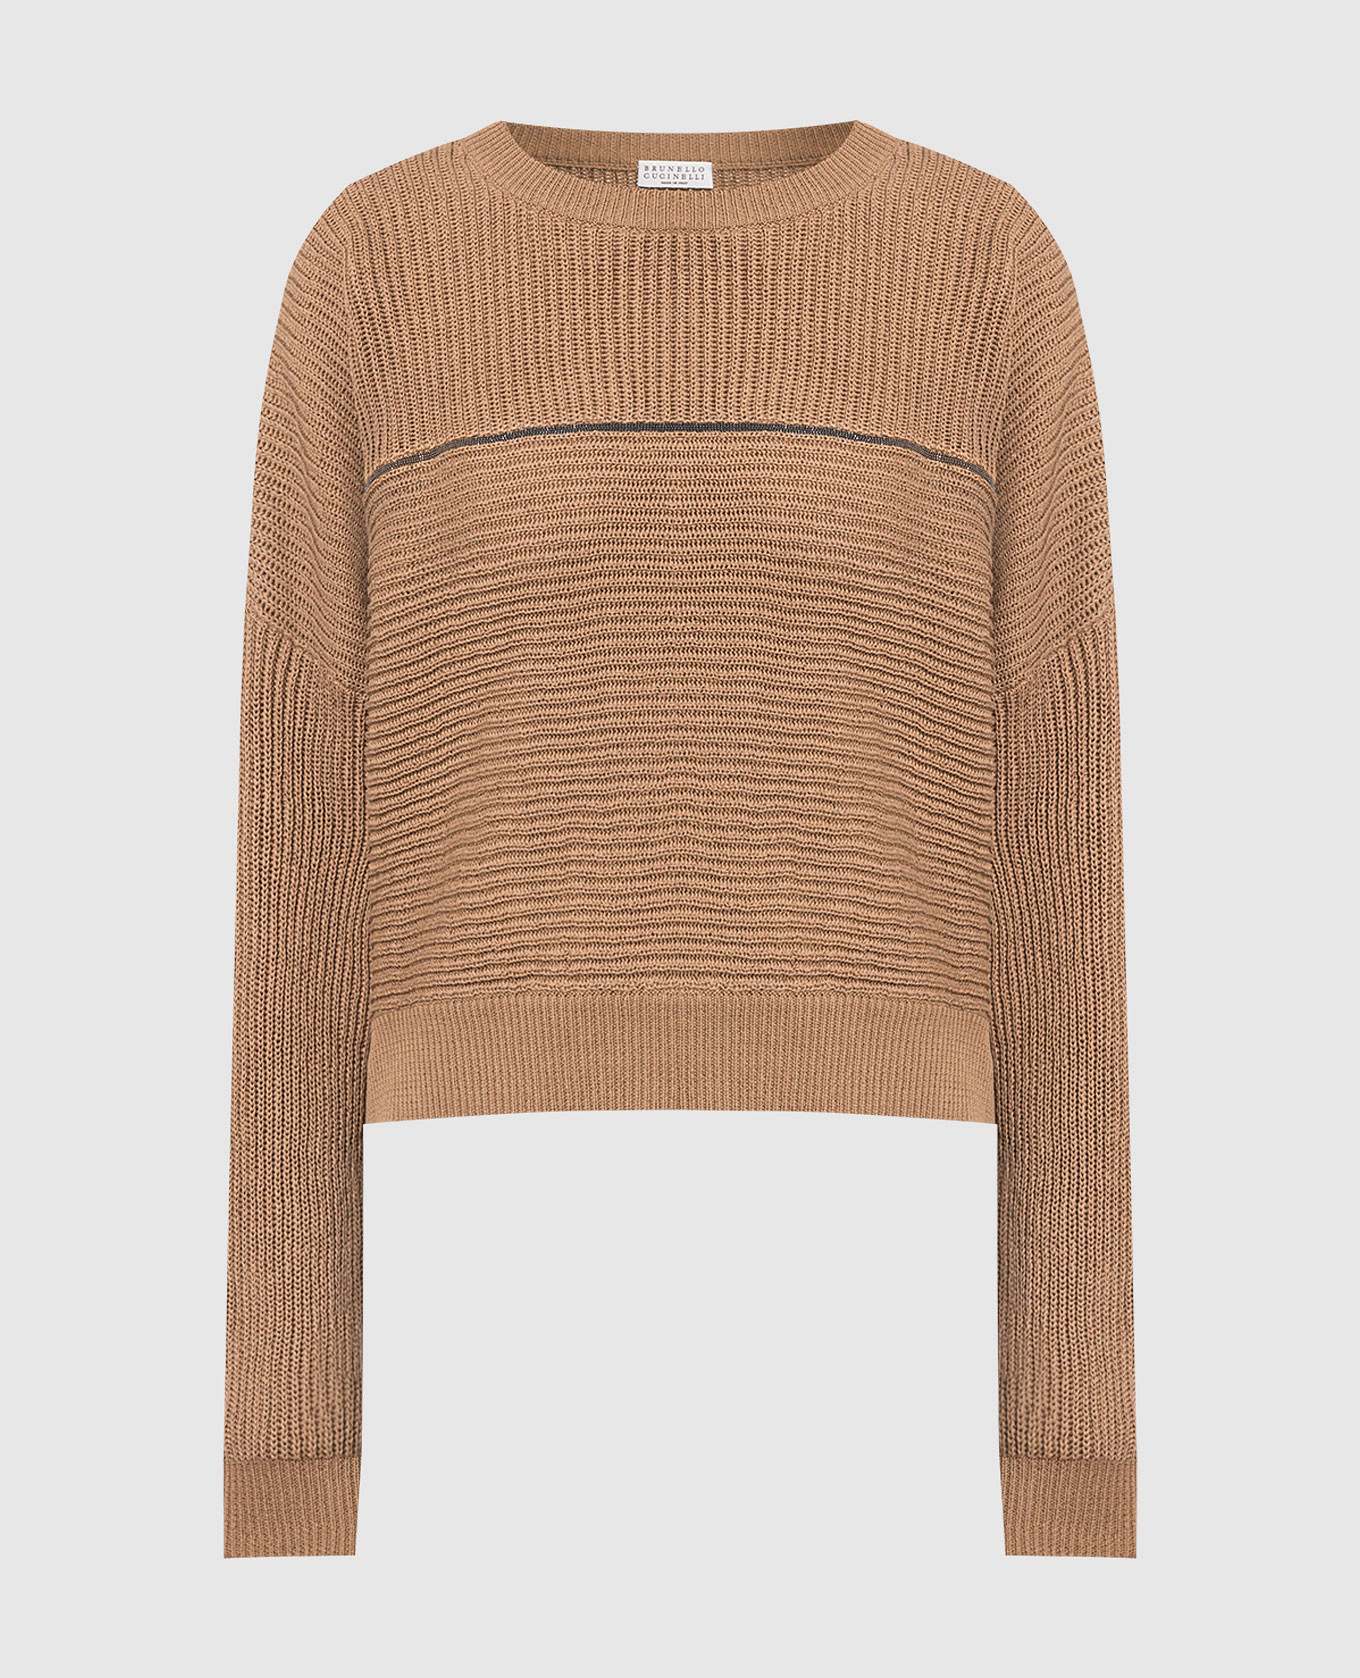 Brown jumper with monil chain